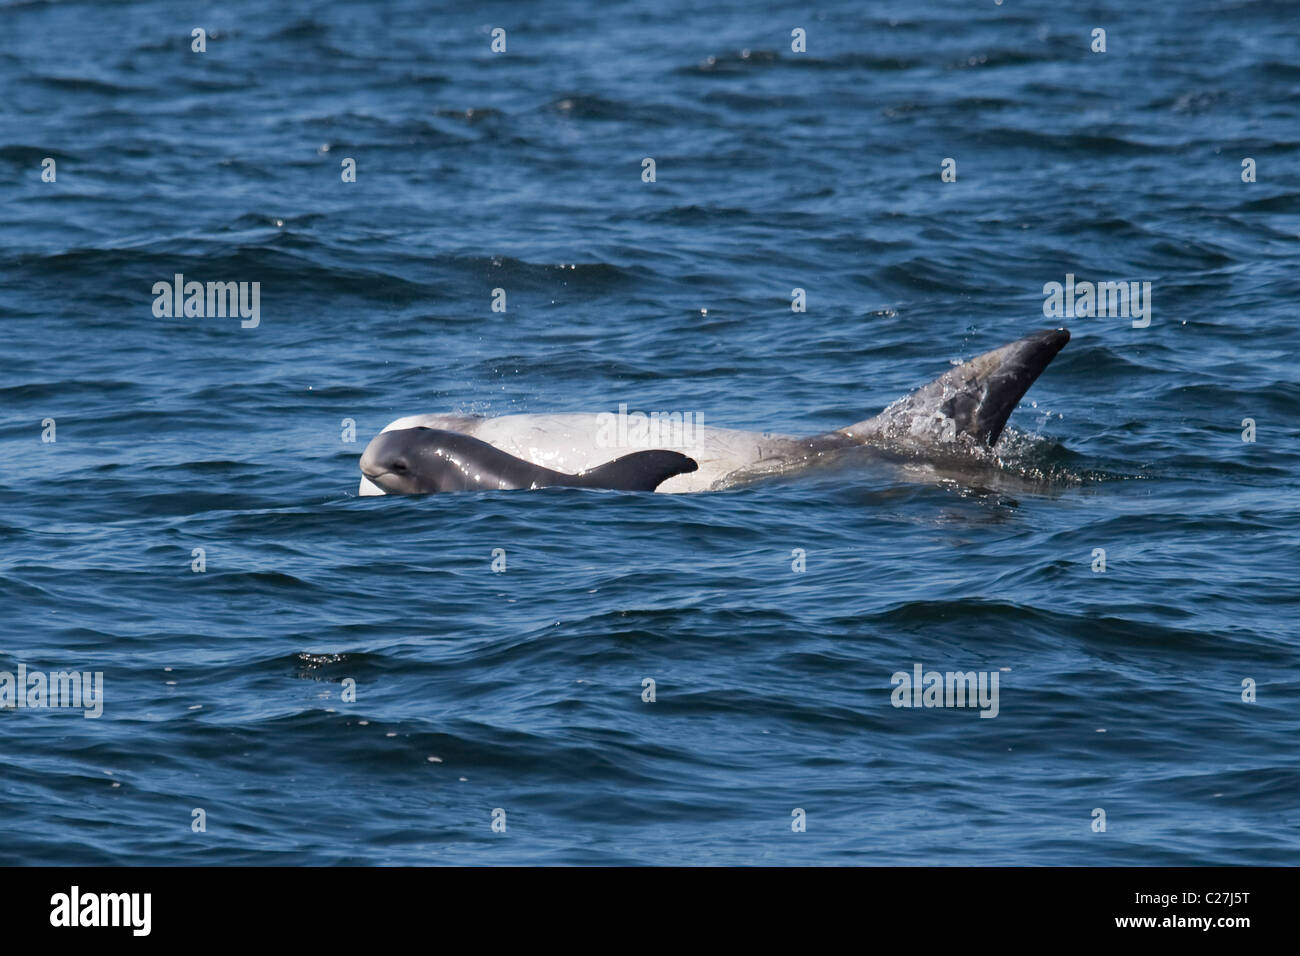 Risso's Dolphin Calf (Grampus griseus) surfacing. Monterey, California, Pacific Ocean. The calf is between 2 and 4 weeks old. Stock Photo